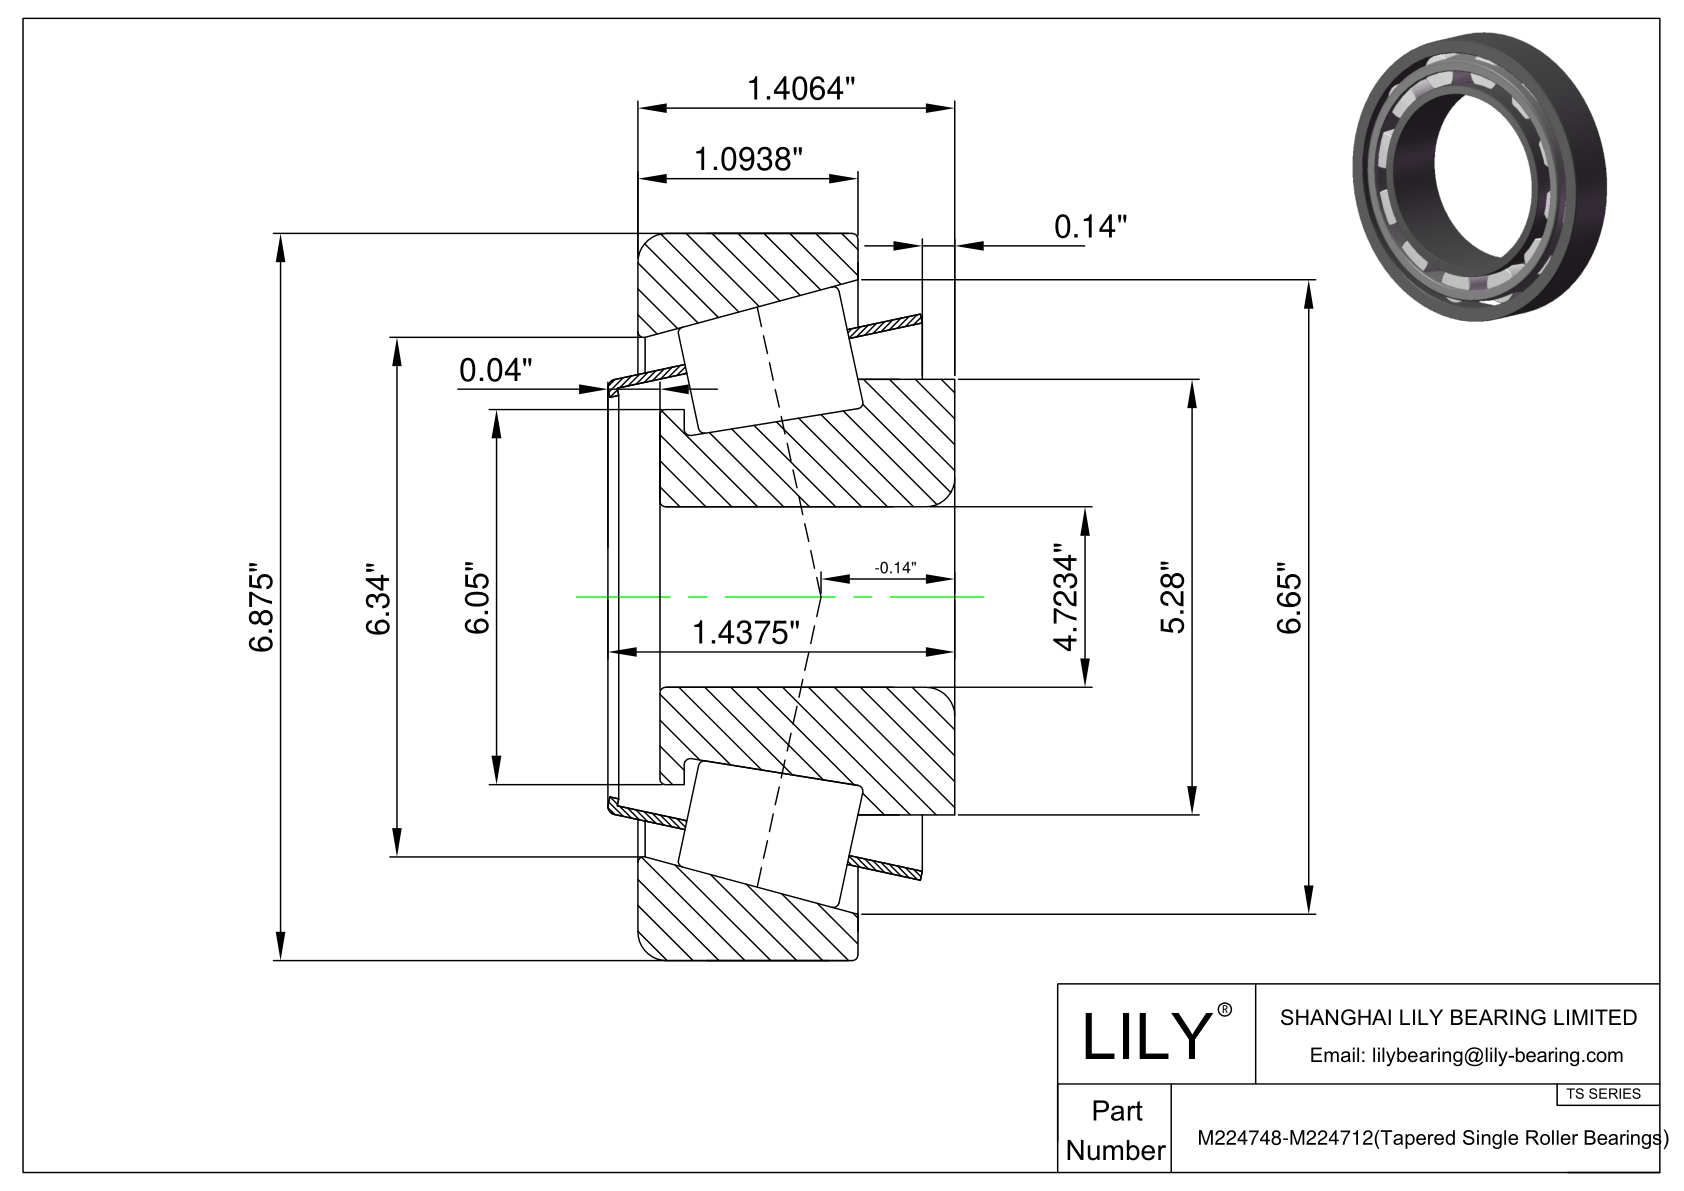 M224748-M224712 TS (Tapered Single Roller Bearings) (Imperial) cad drawing